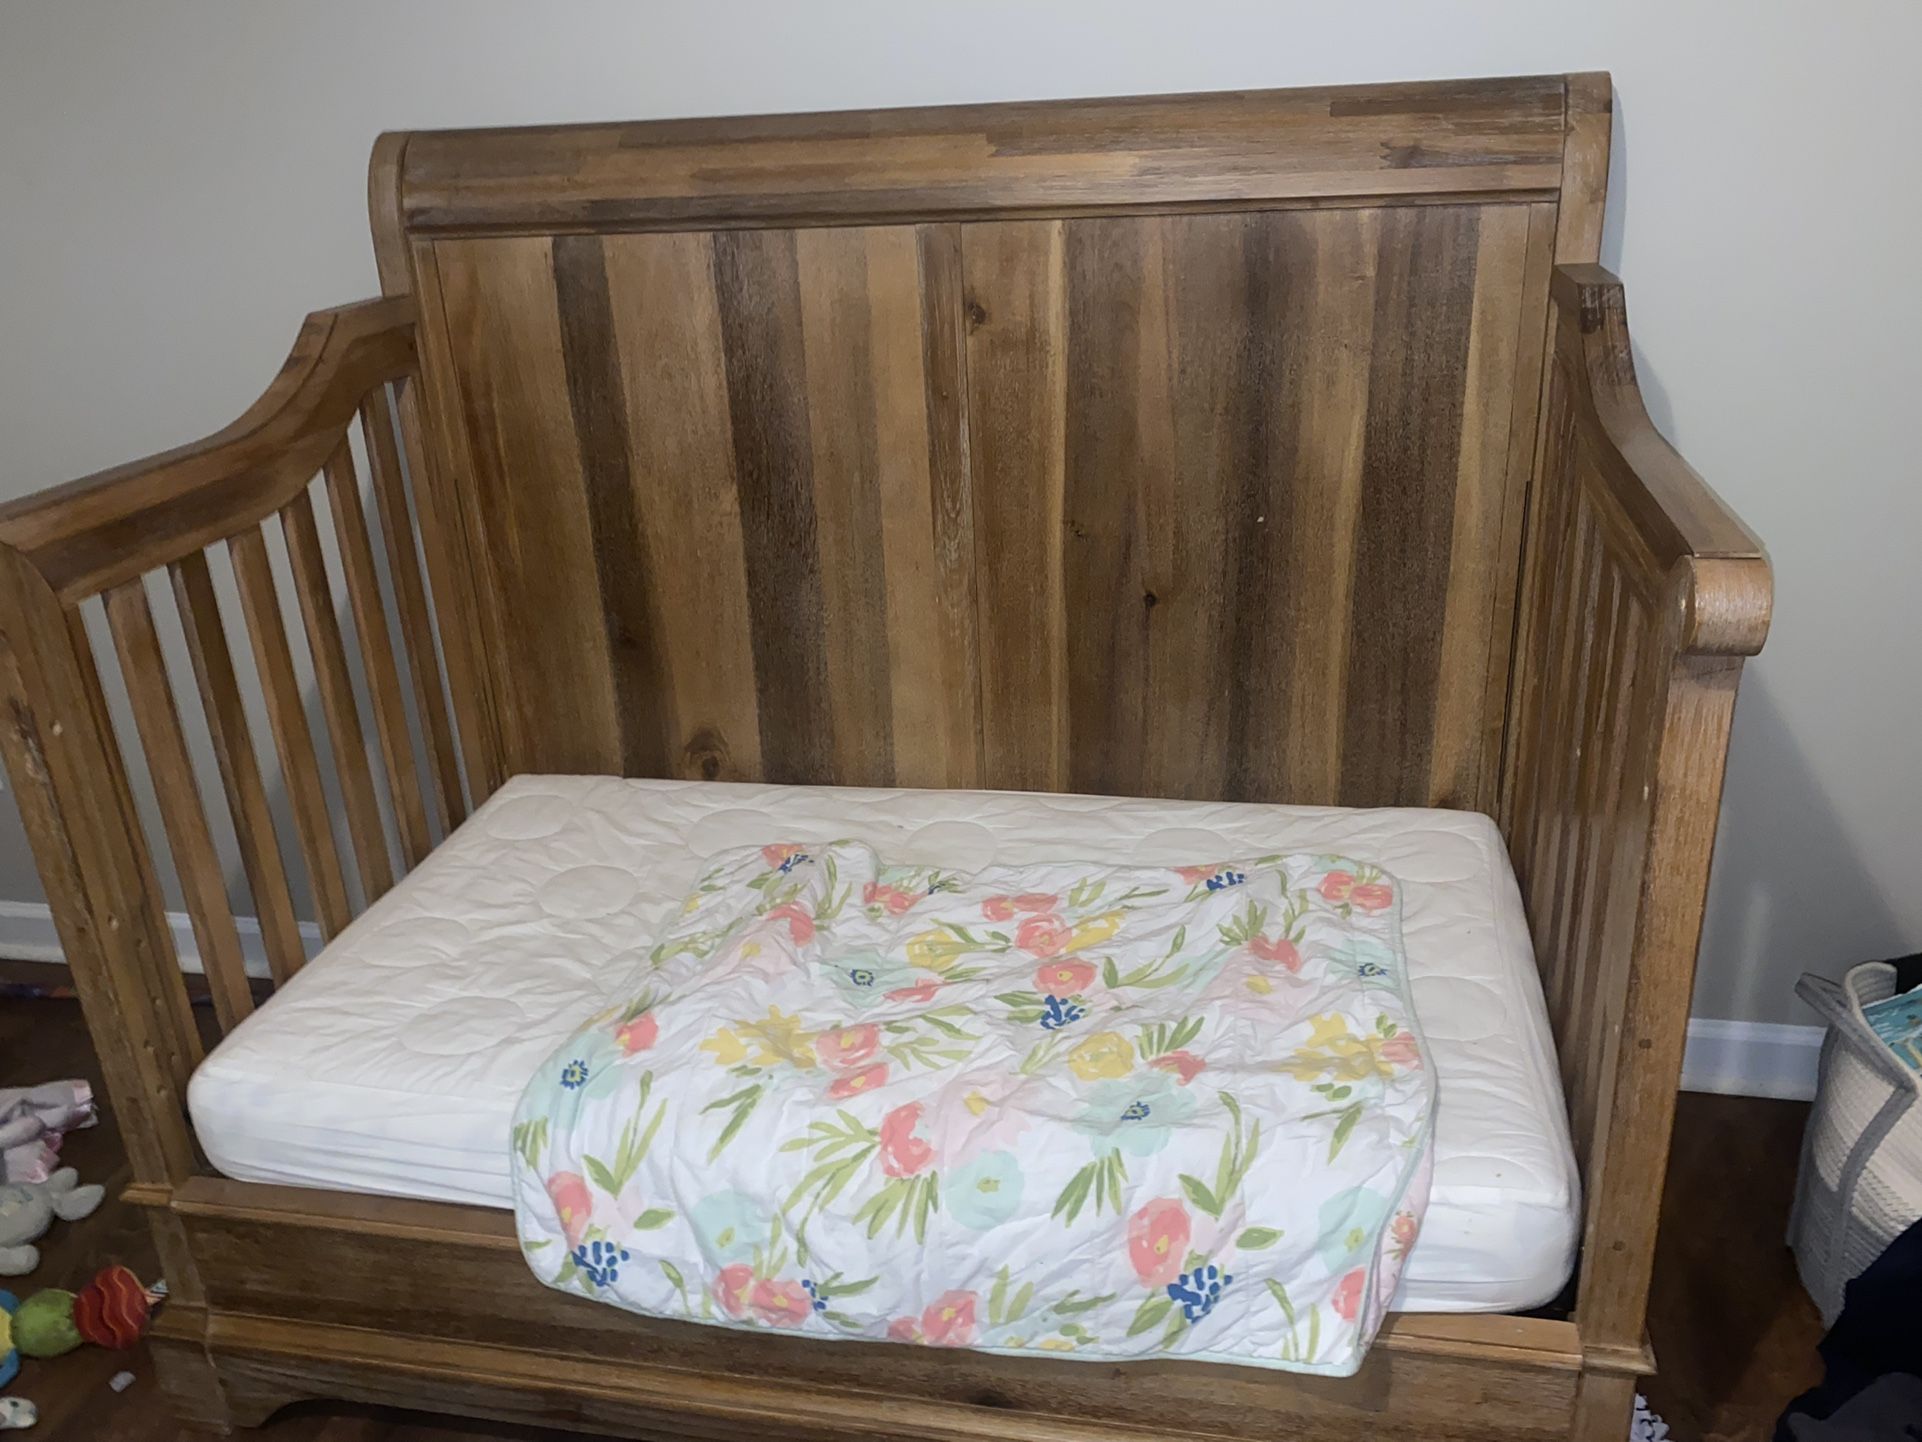 The is a toddler bed but we also have the rail that makes it a crib. Comes with mattress & mattress cover as well as the dresser. No marks!  